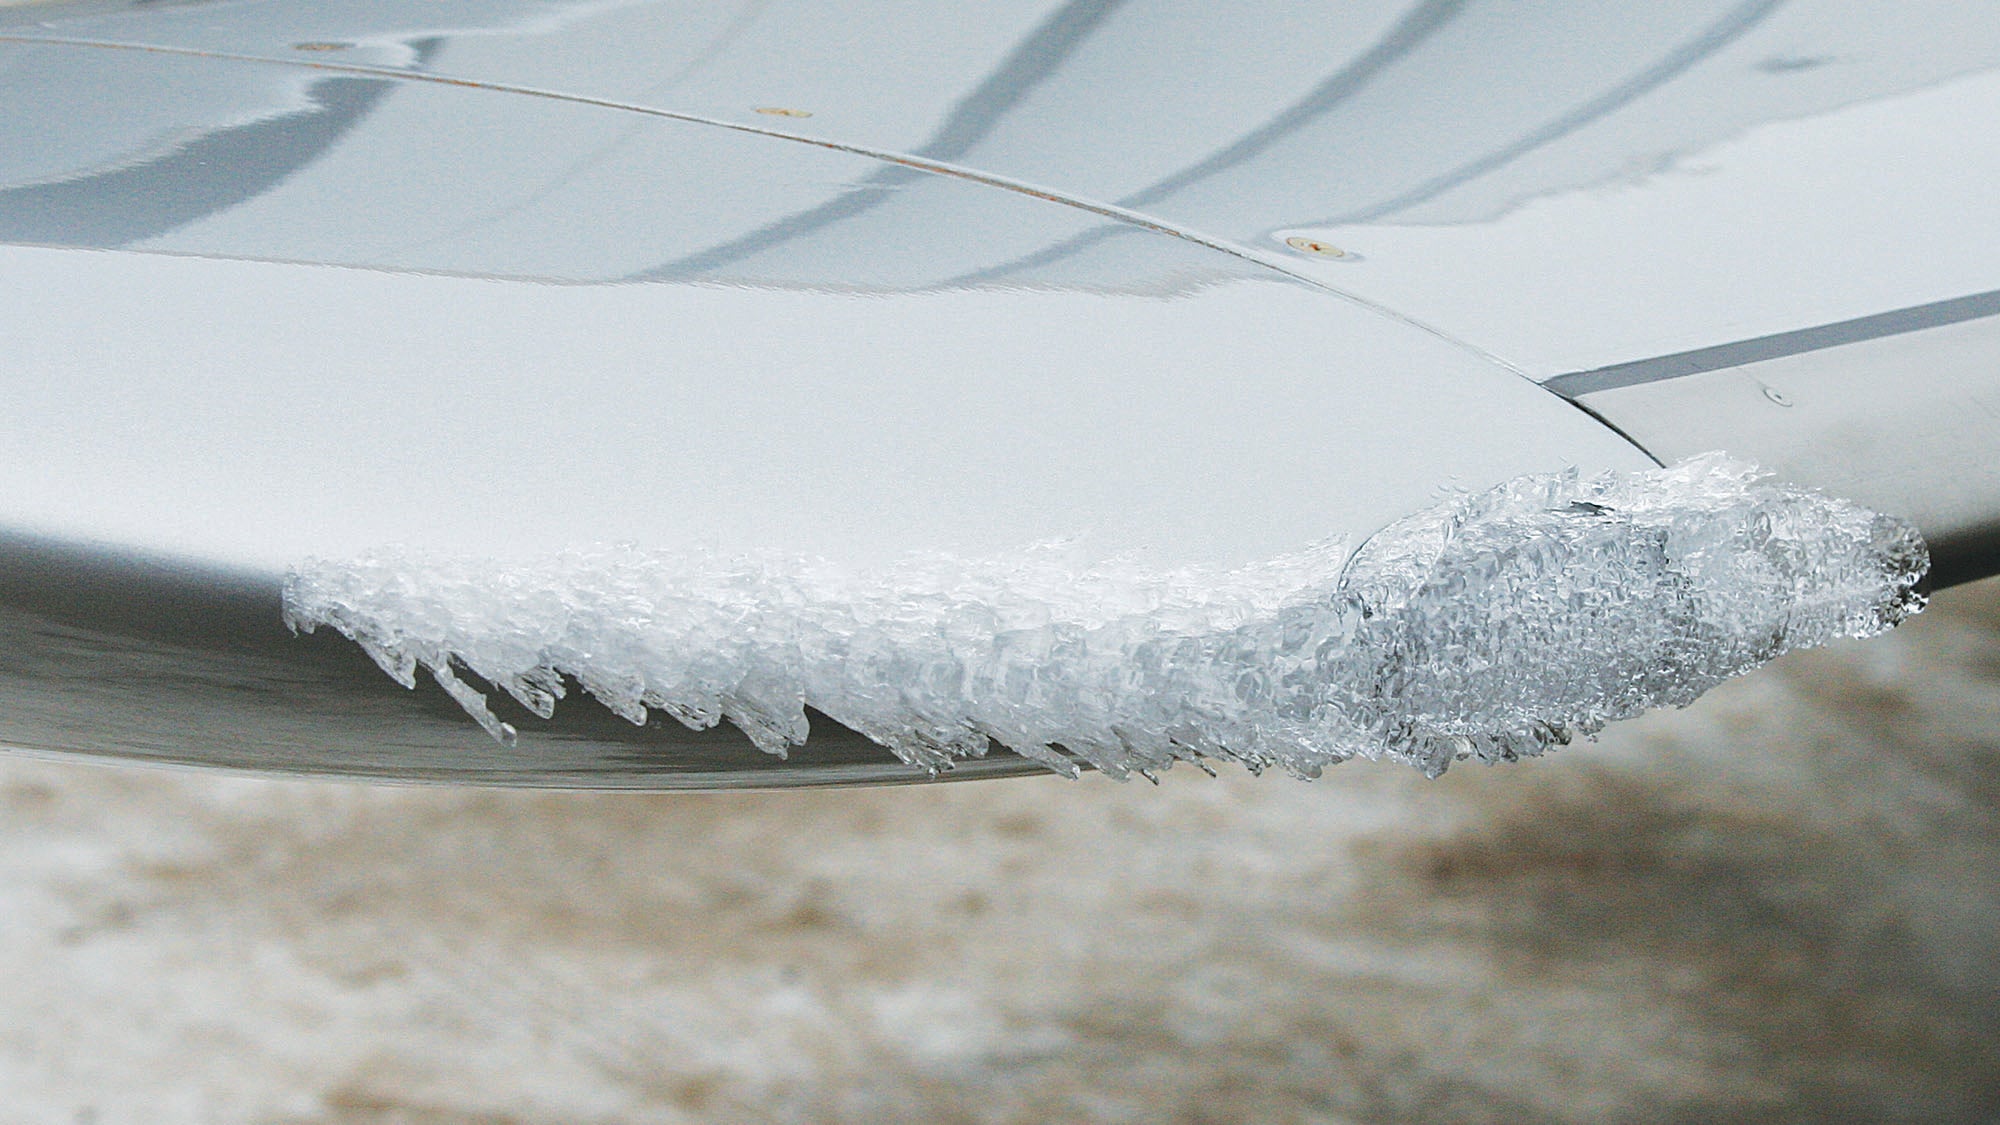 Before takeoff, there's no such thing as a safe amount of ice.